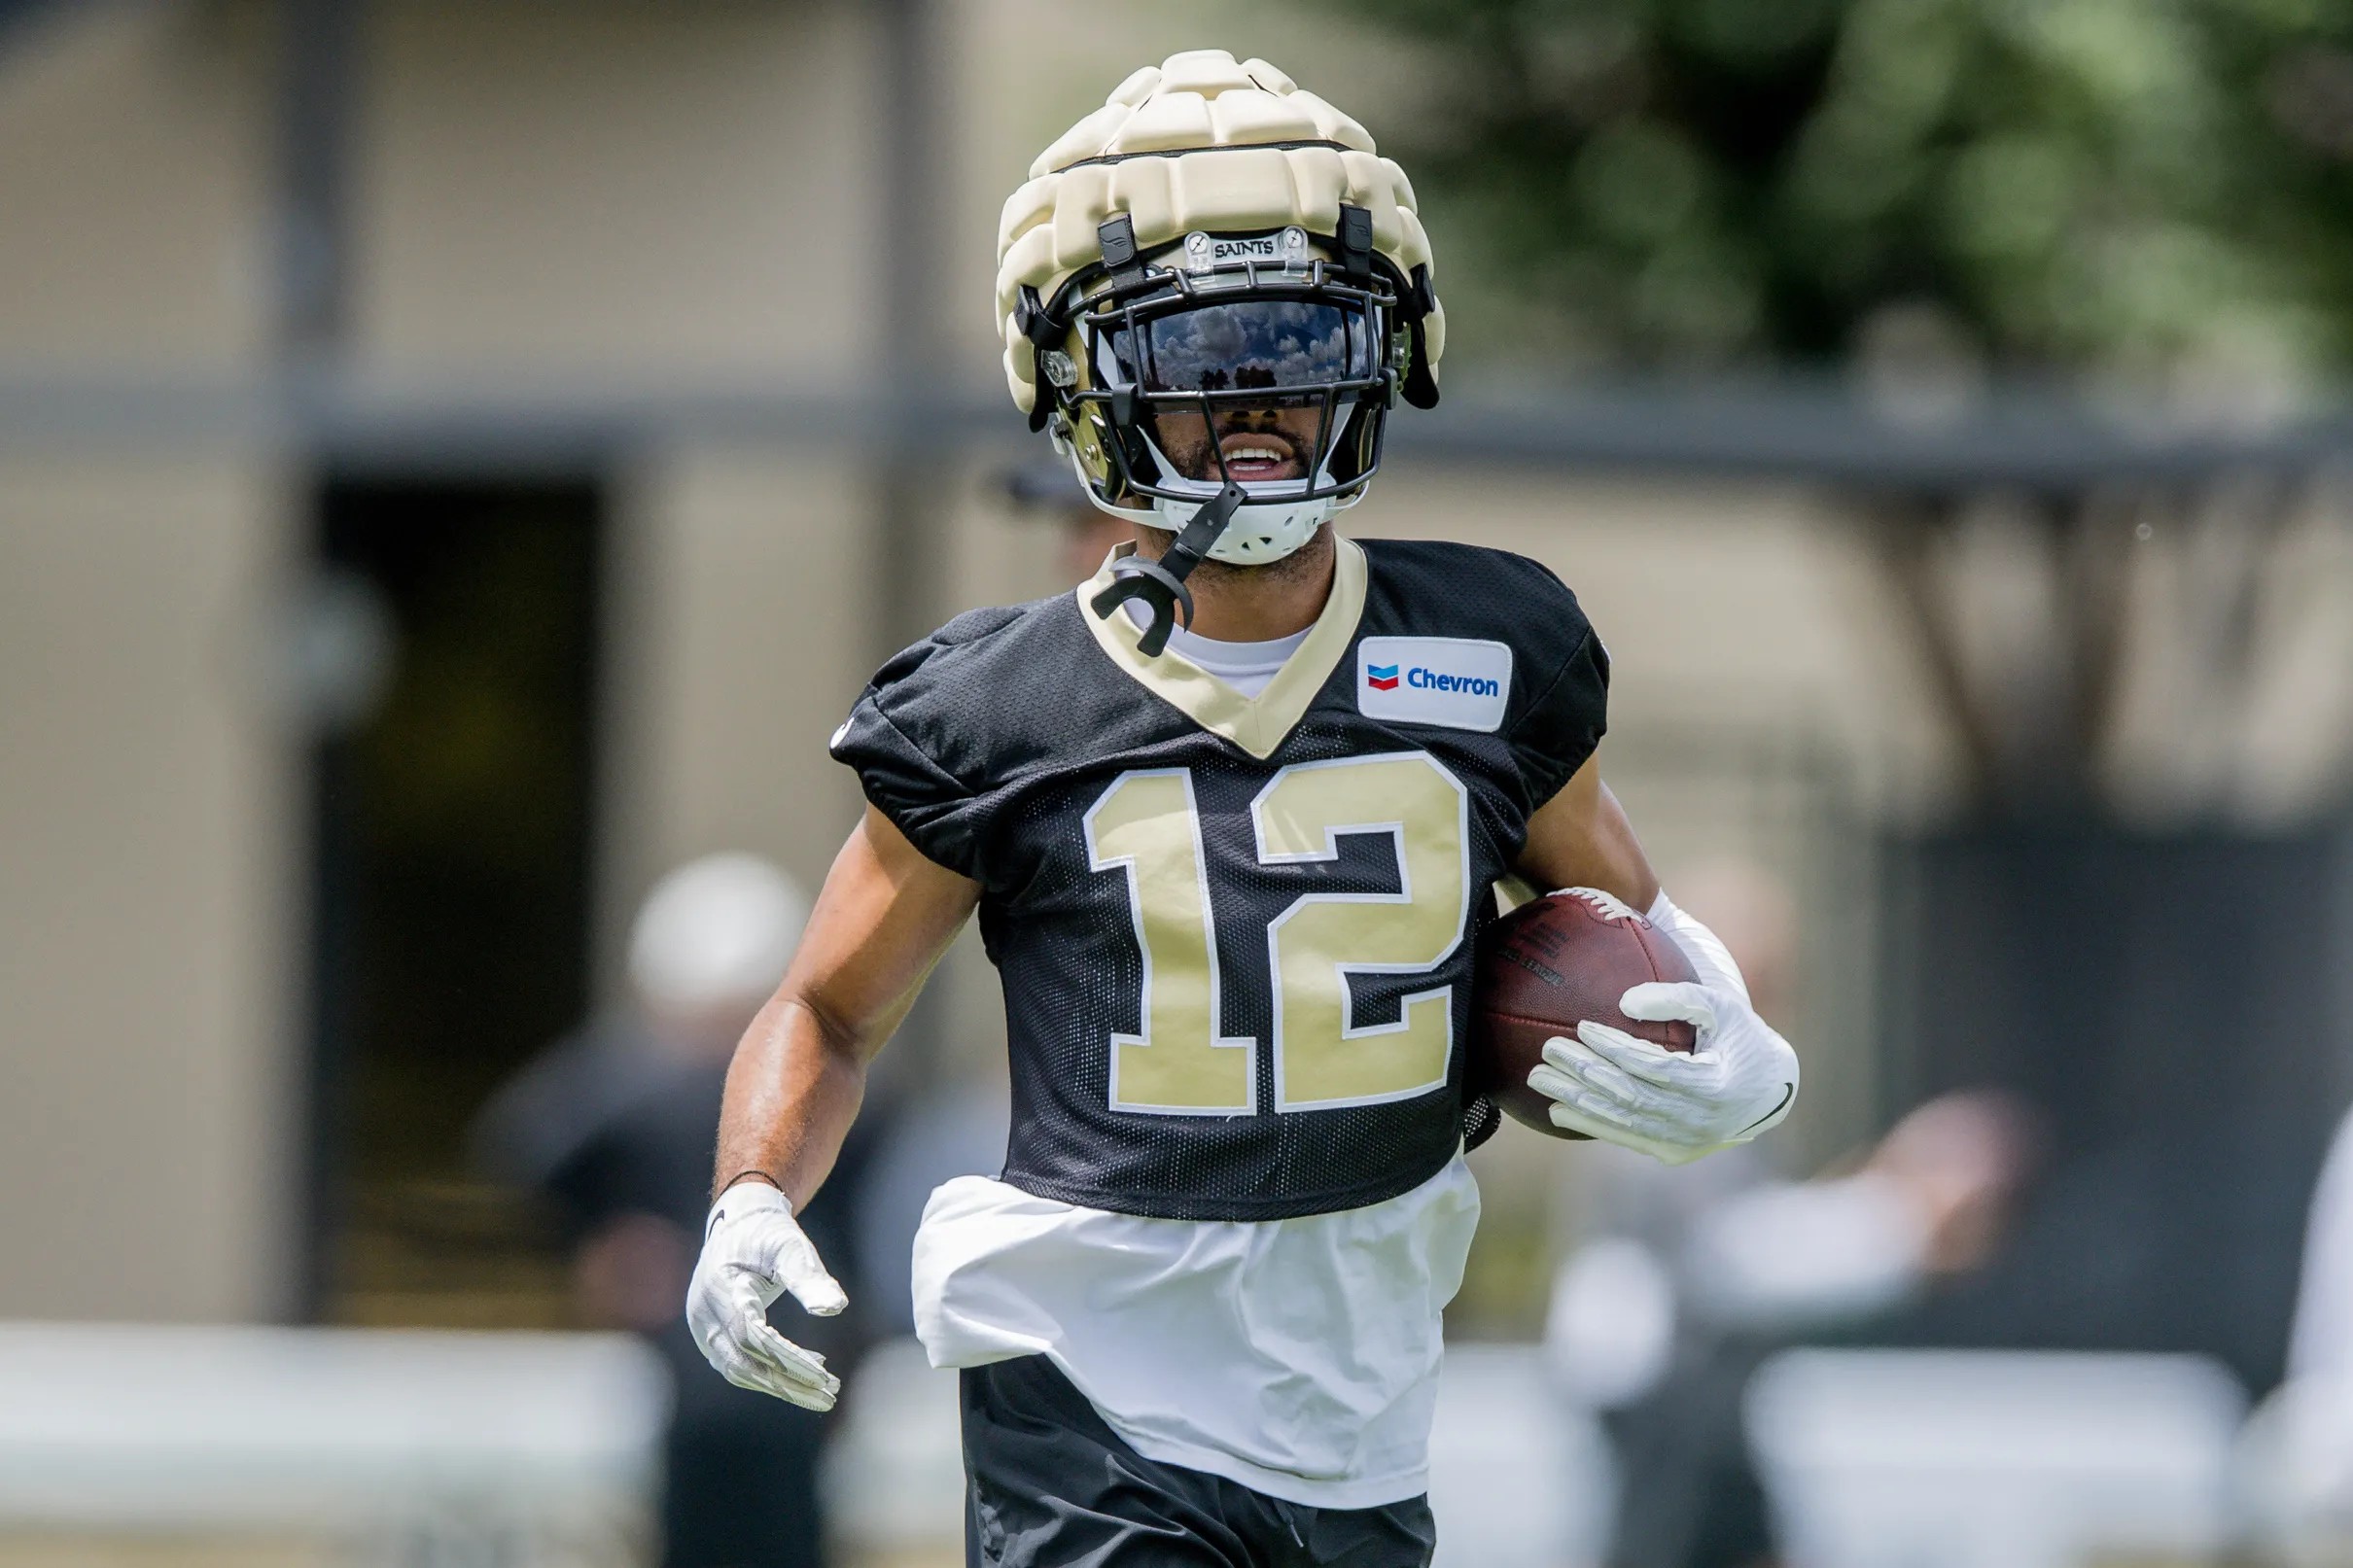 Chris Olave is just what the Saints needed - Canal Street Chronicles